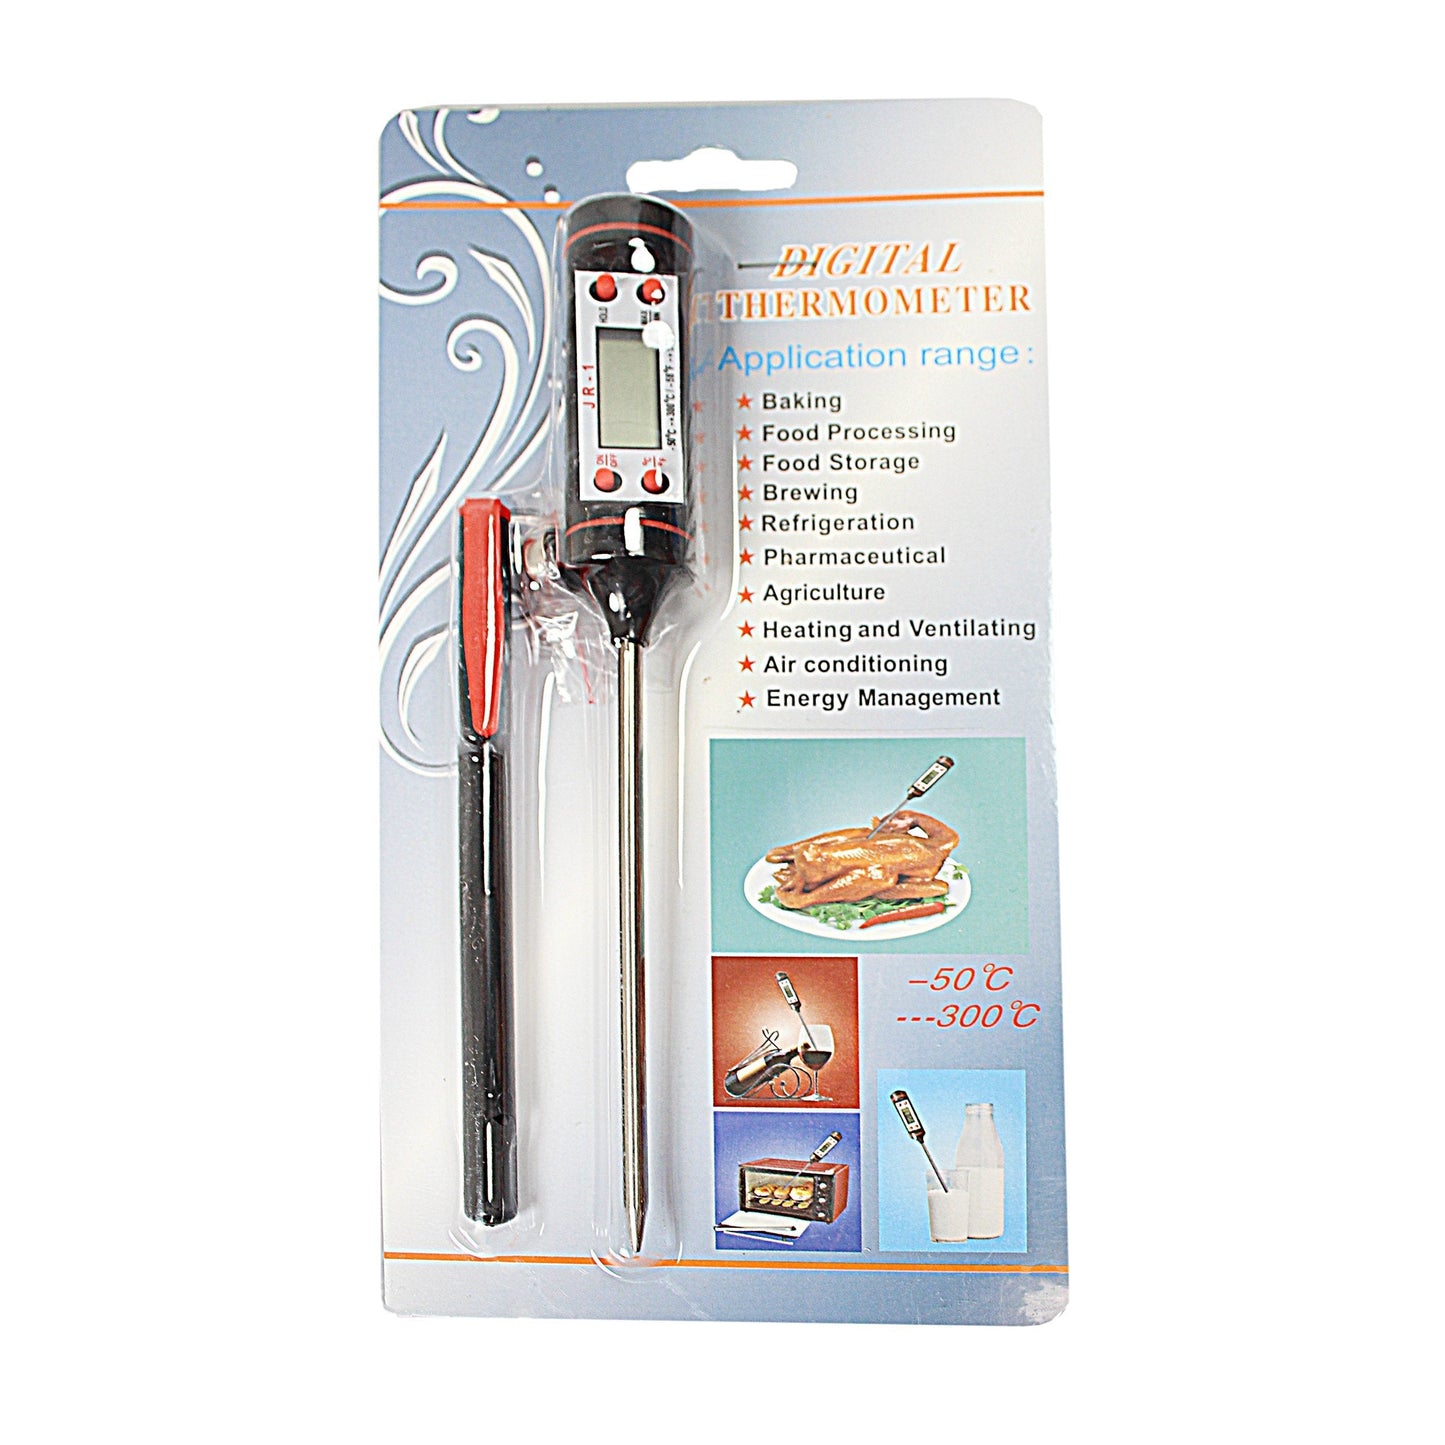 Digital Food Baking Thermometer 4943 (Parcel Rate)